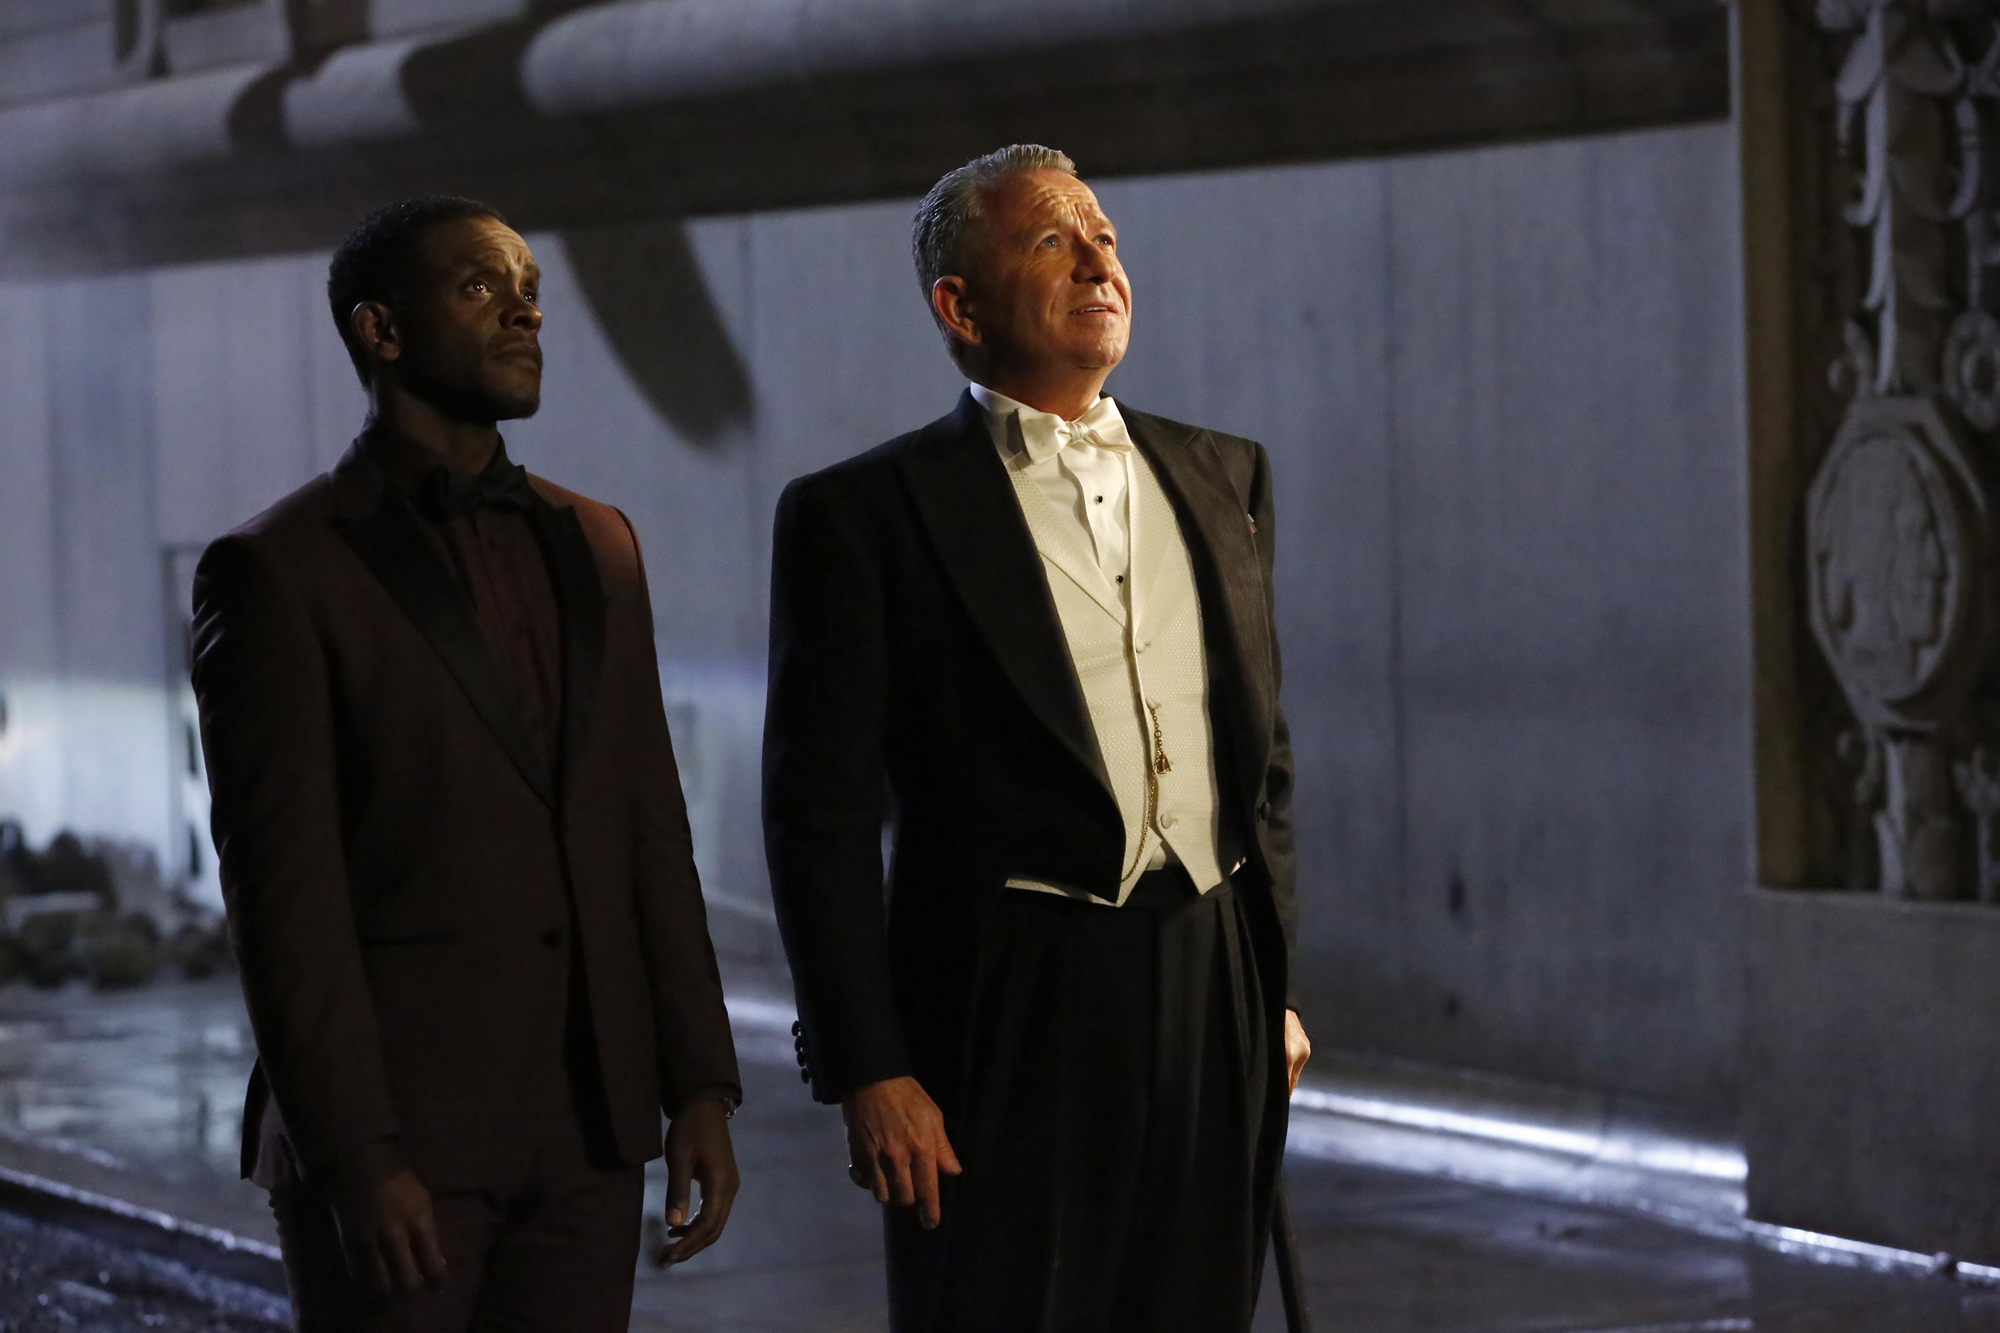 5x12 - The Beginning - Lucius and Alfred